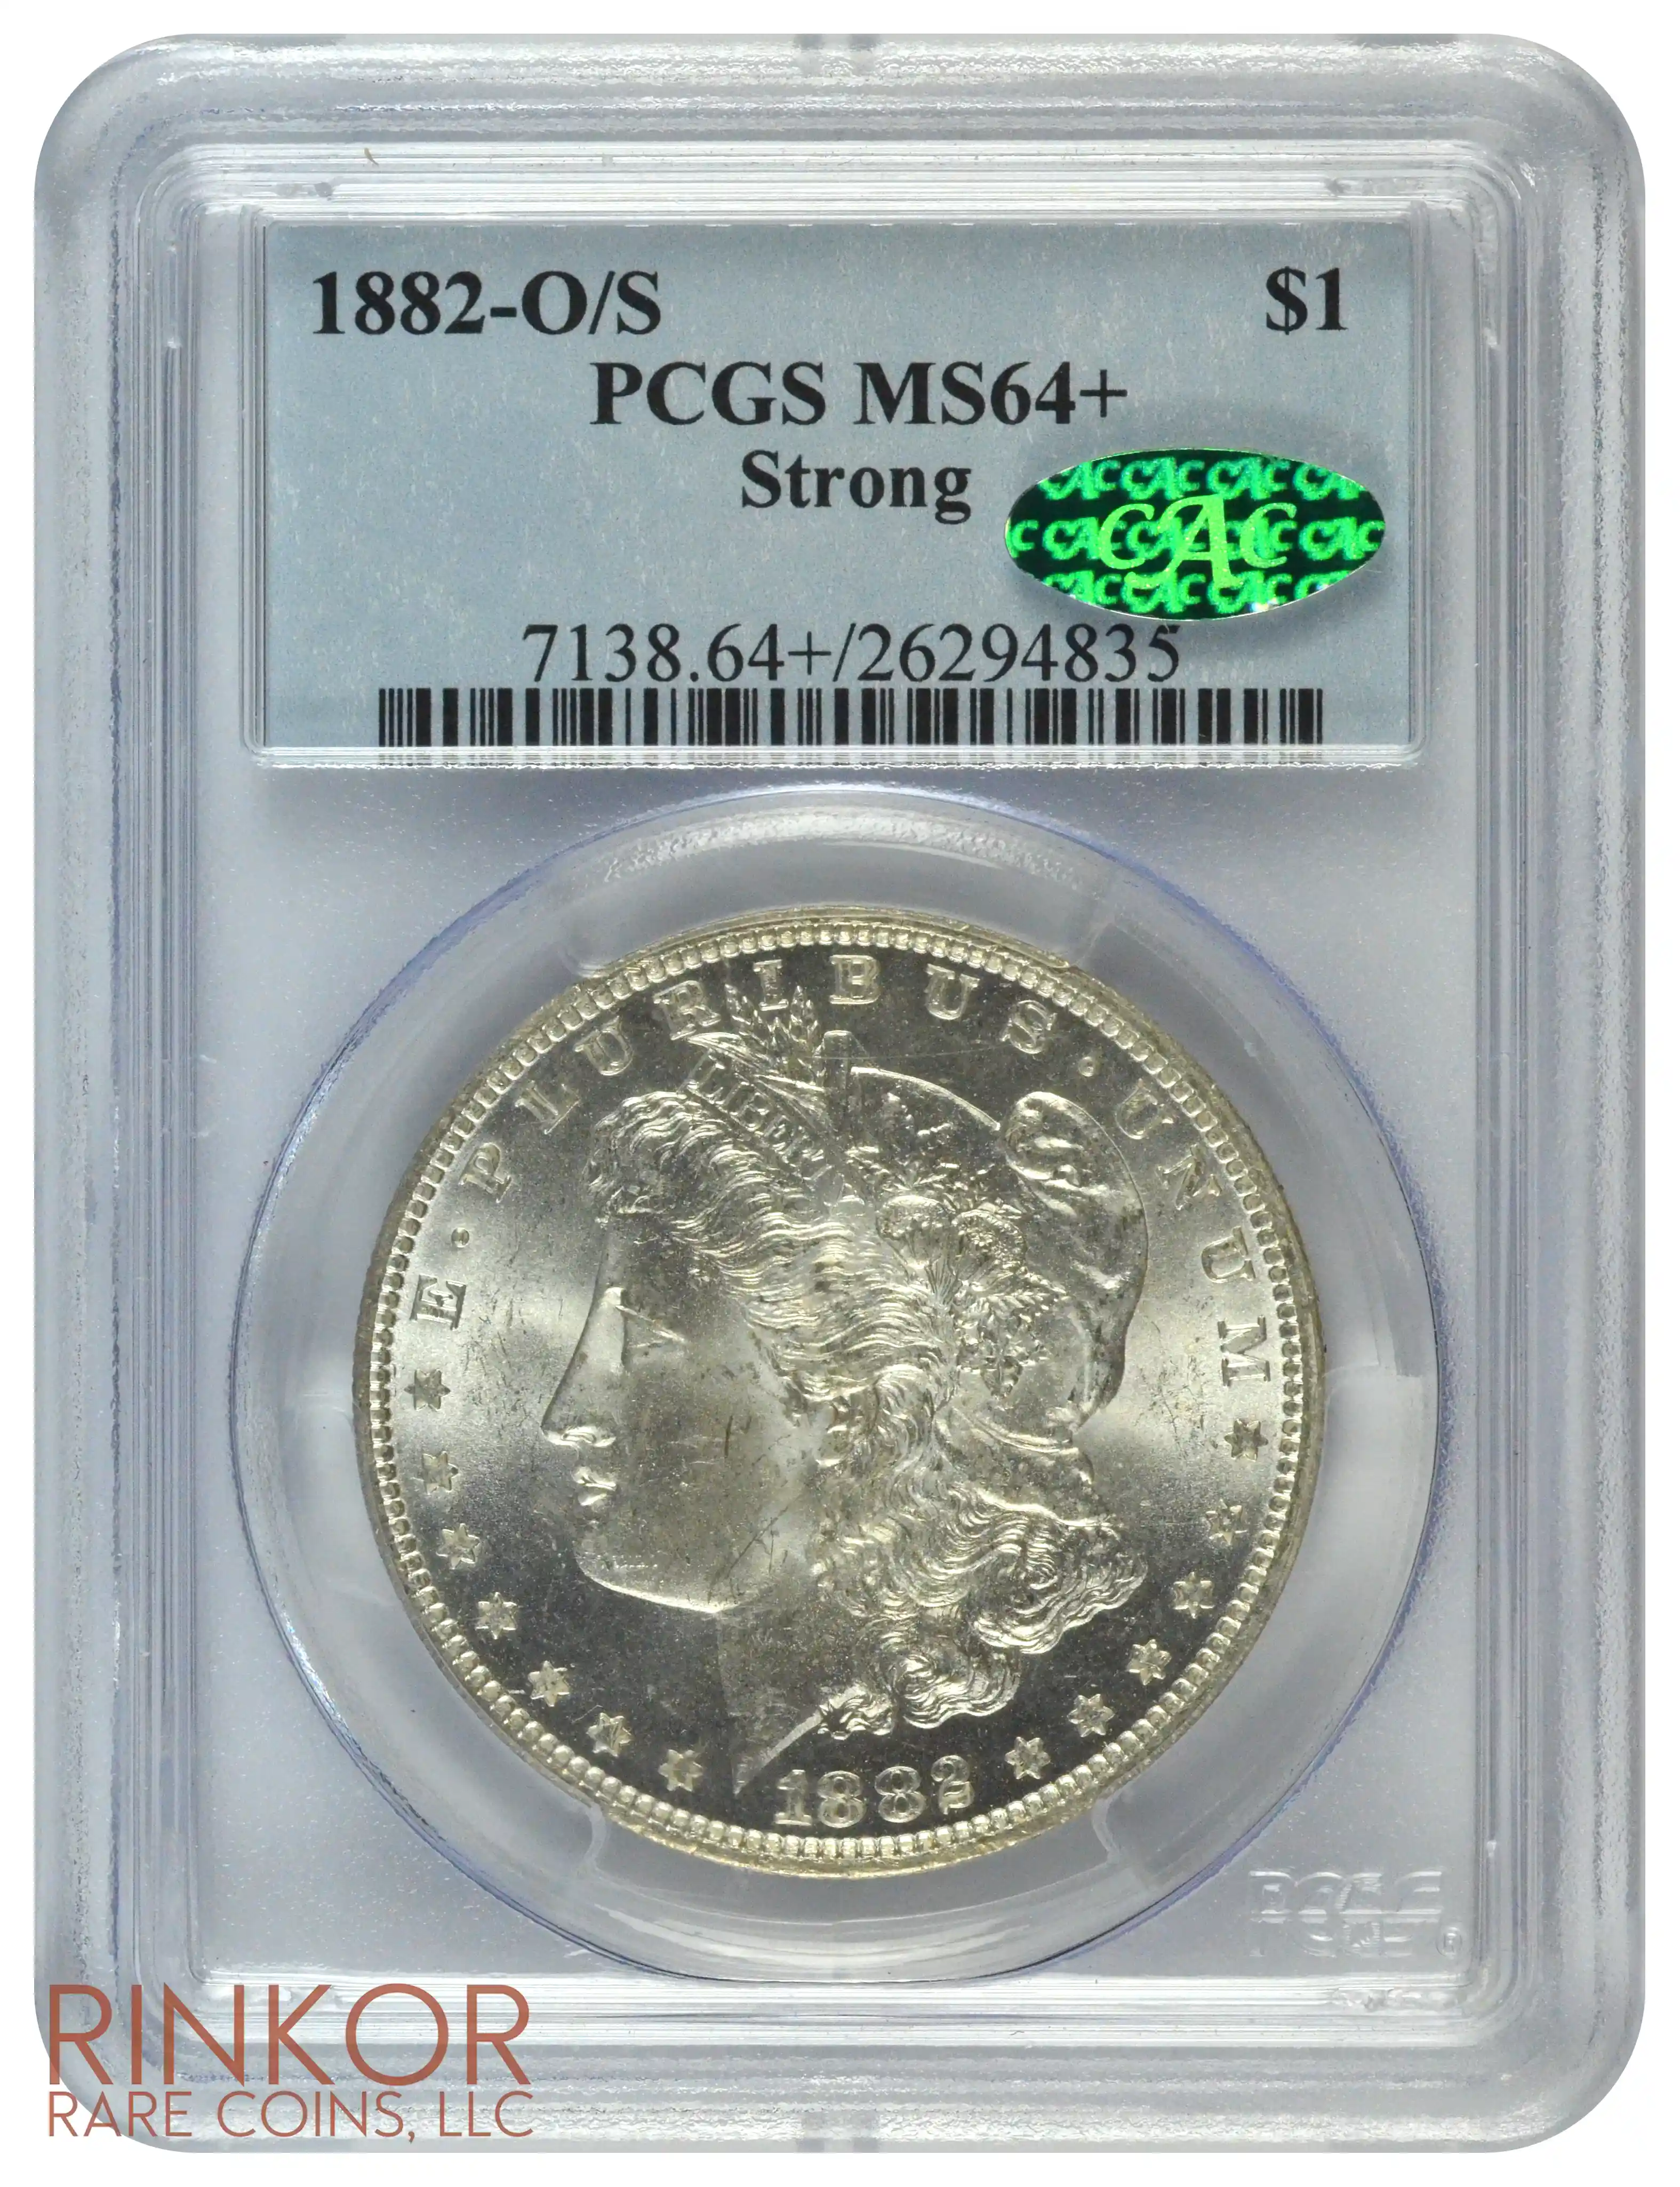 1882-O/S Strong $1 PCGS MS 64+ CAC